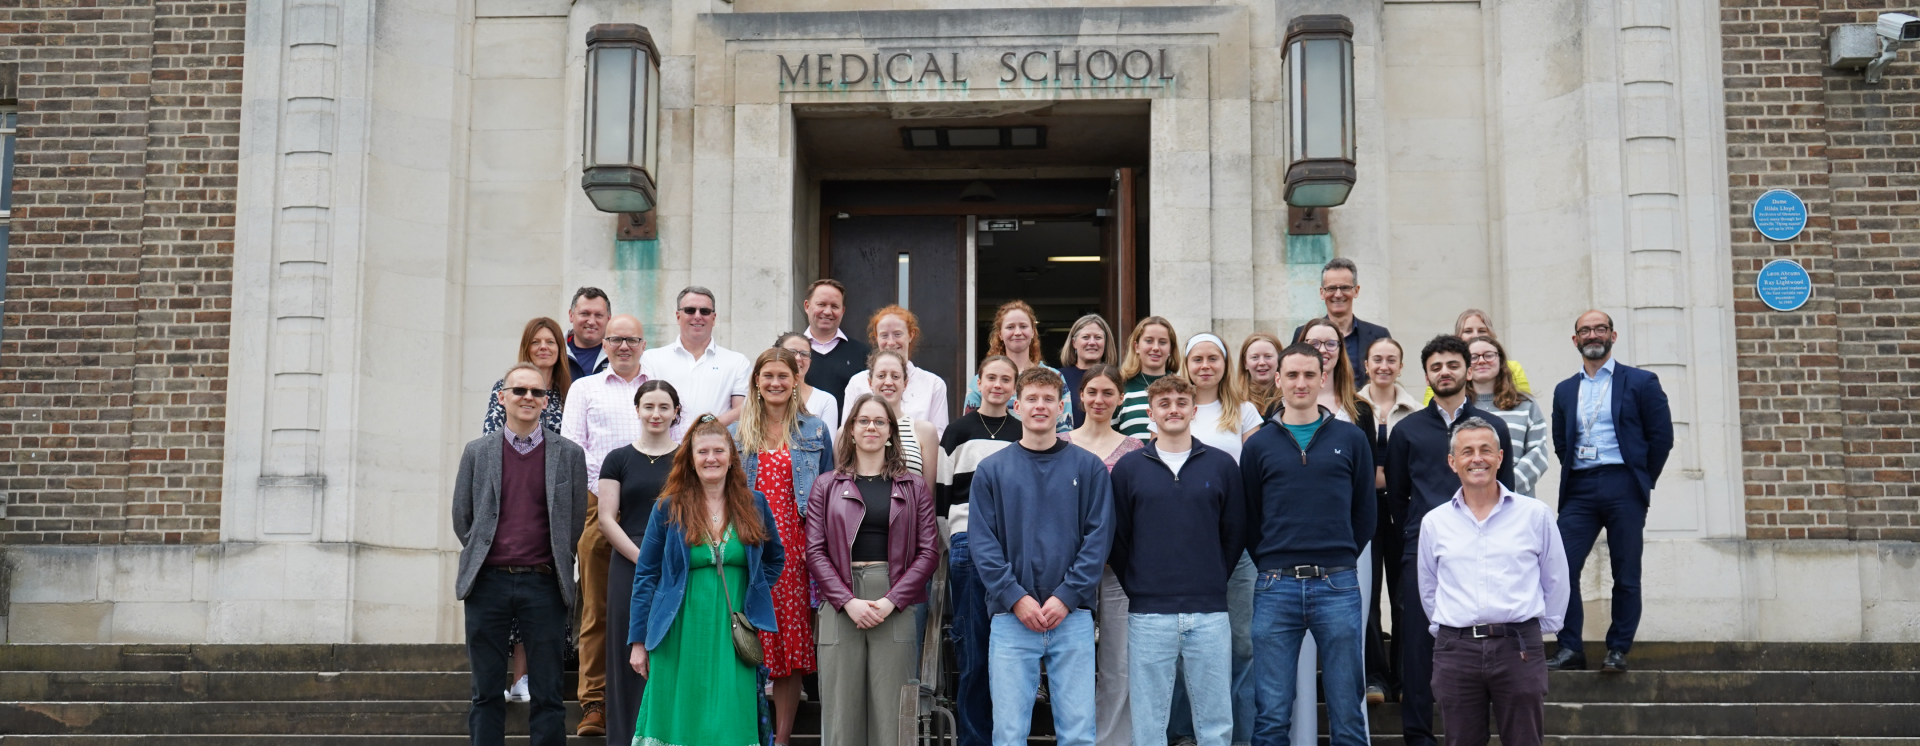 Student winners and staff celebrating the launch of the bursary, stood on the steps of the Medical School